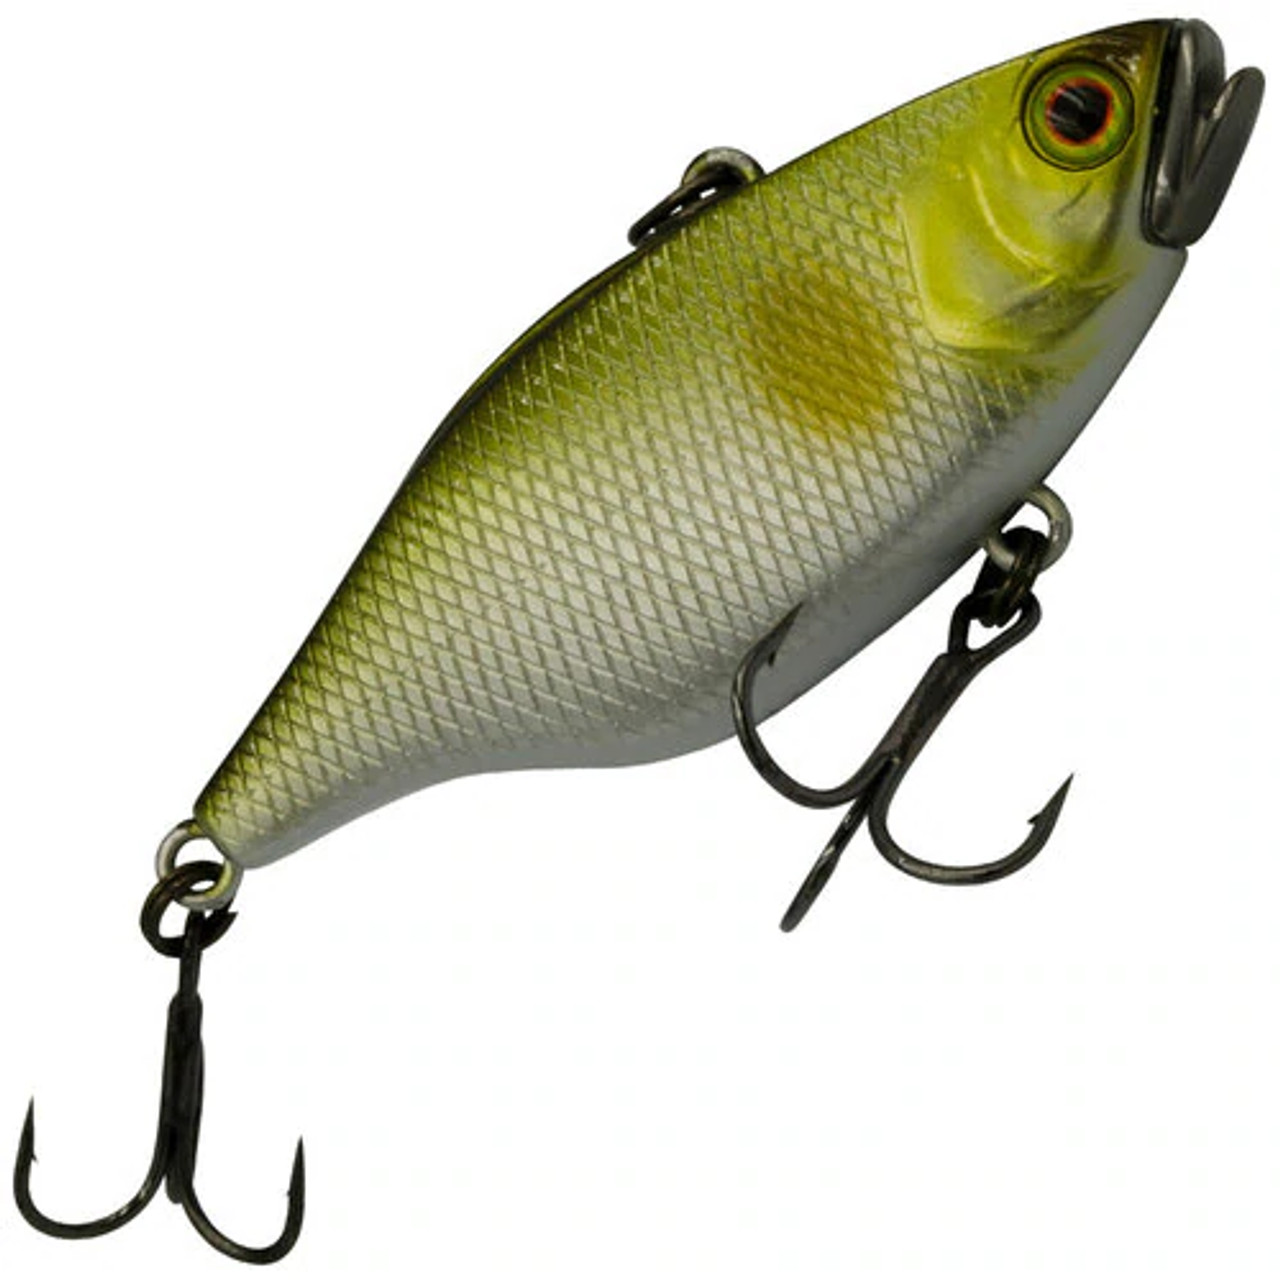 Jackall Lures - So many #Jackall soft baits to choose from, I can